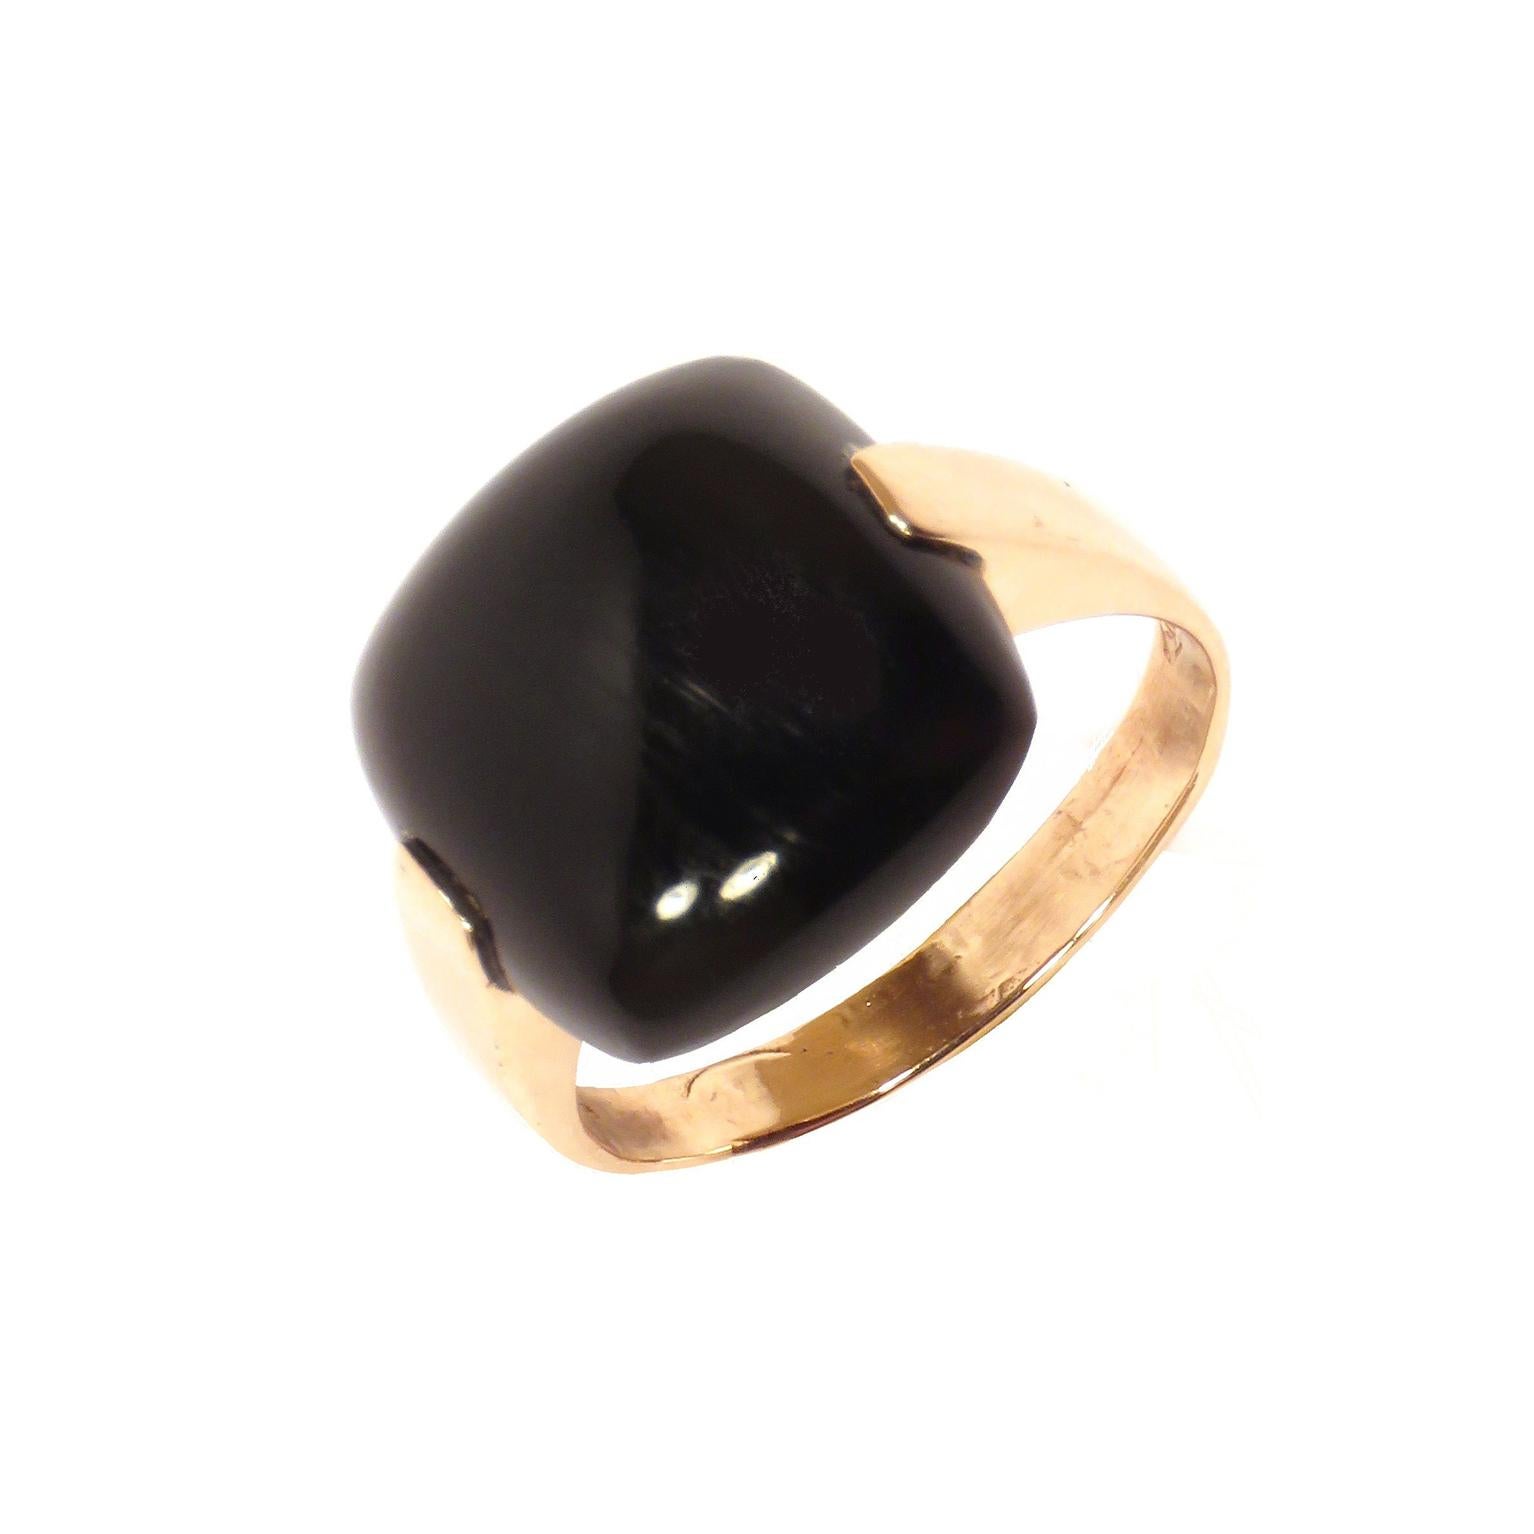 Onyx Rose Gold Ring Handcrafted in Italy by Botta Gioielli